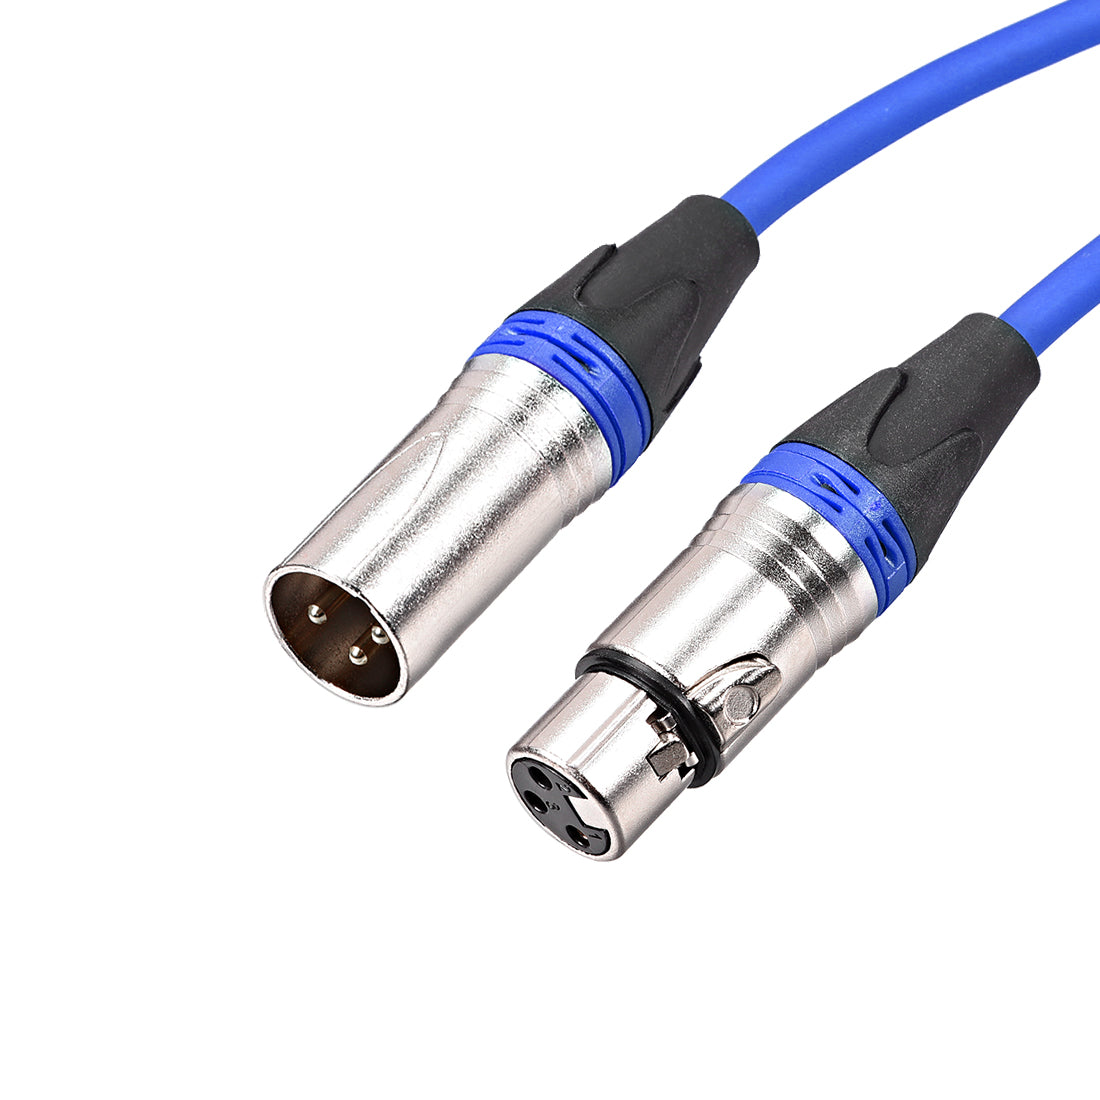 uxcell Uxcell XLR Male to XLR Female Cable Line for Microphone Camera Sound Card Mixer Blue Silver Tone XLR Blue Line 2M  6.56ft